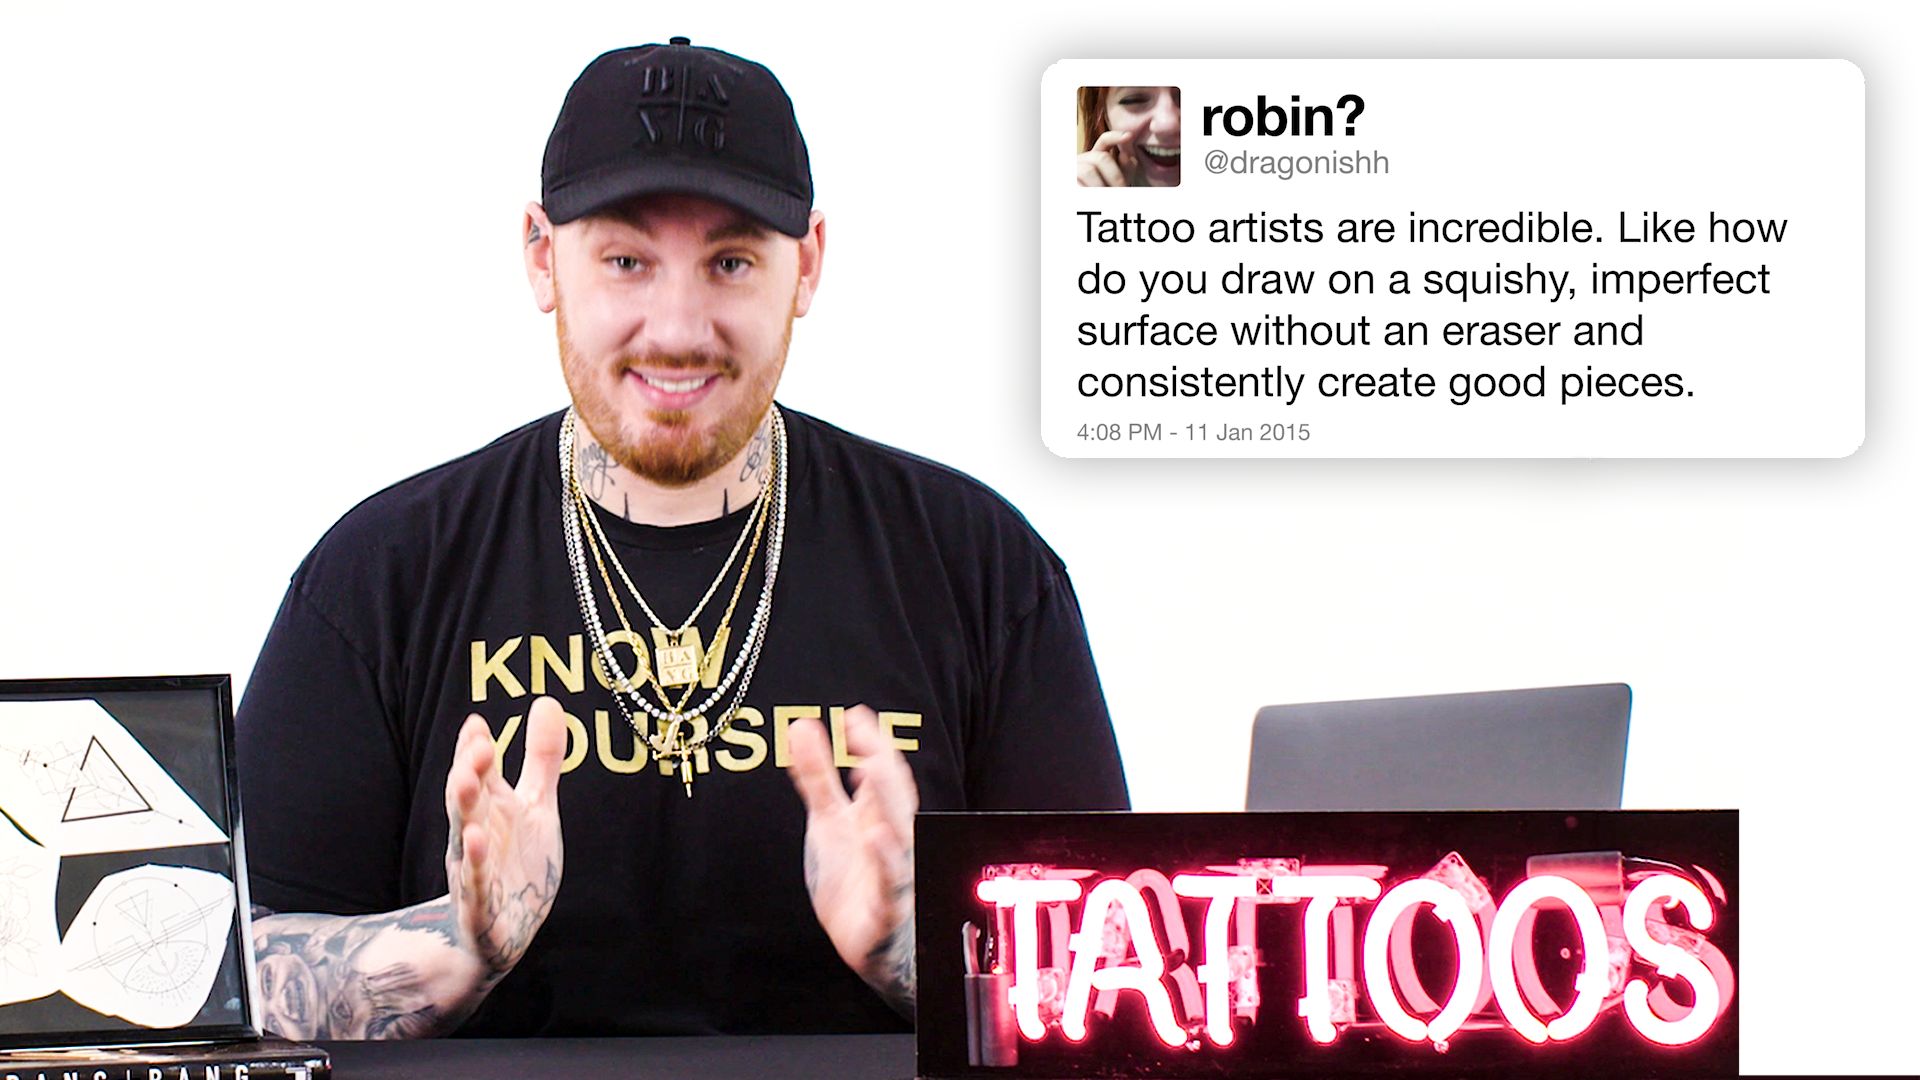 Watch Tattoo Artist Bang Bang Answers More Tattoo Questions From Twitter |  Tech Support | WIRED